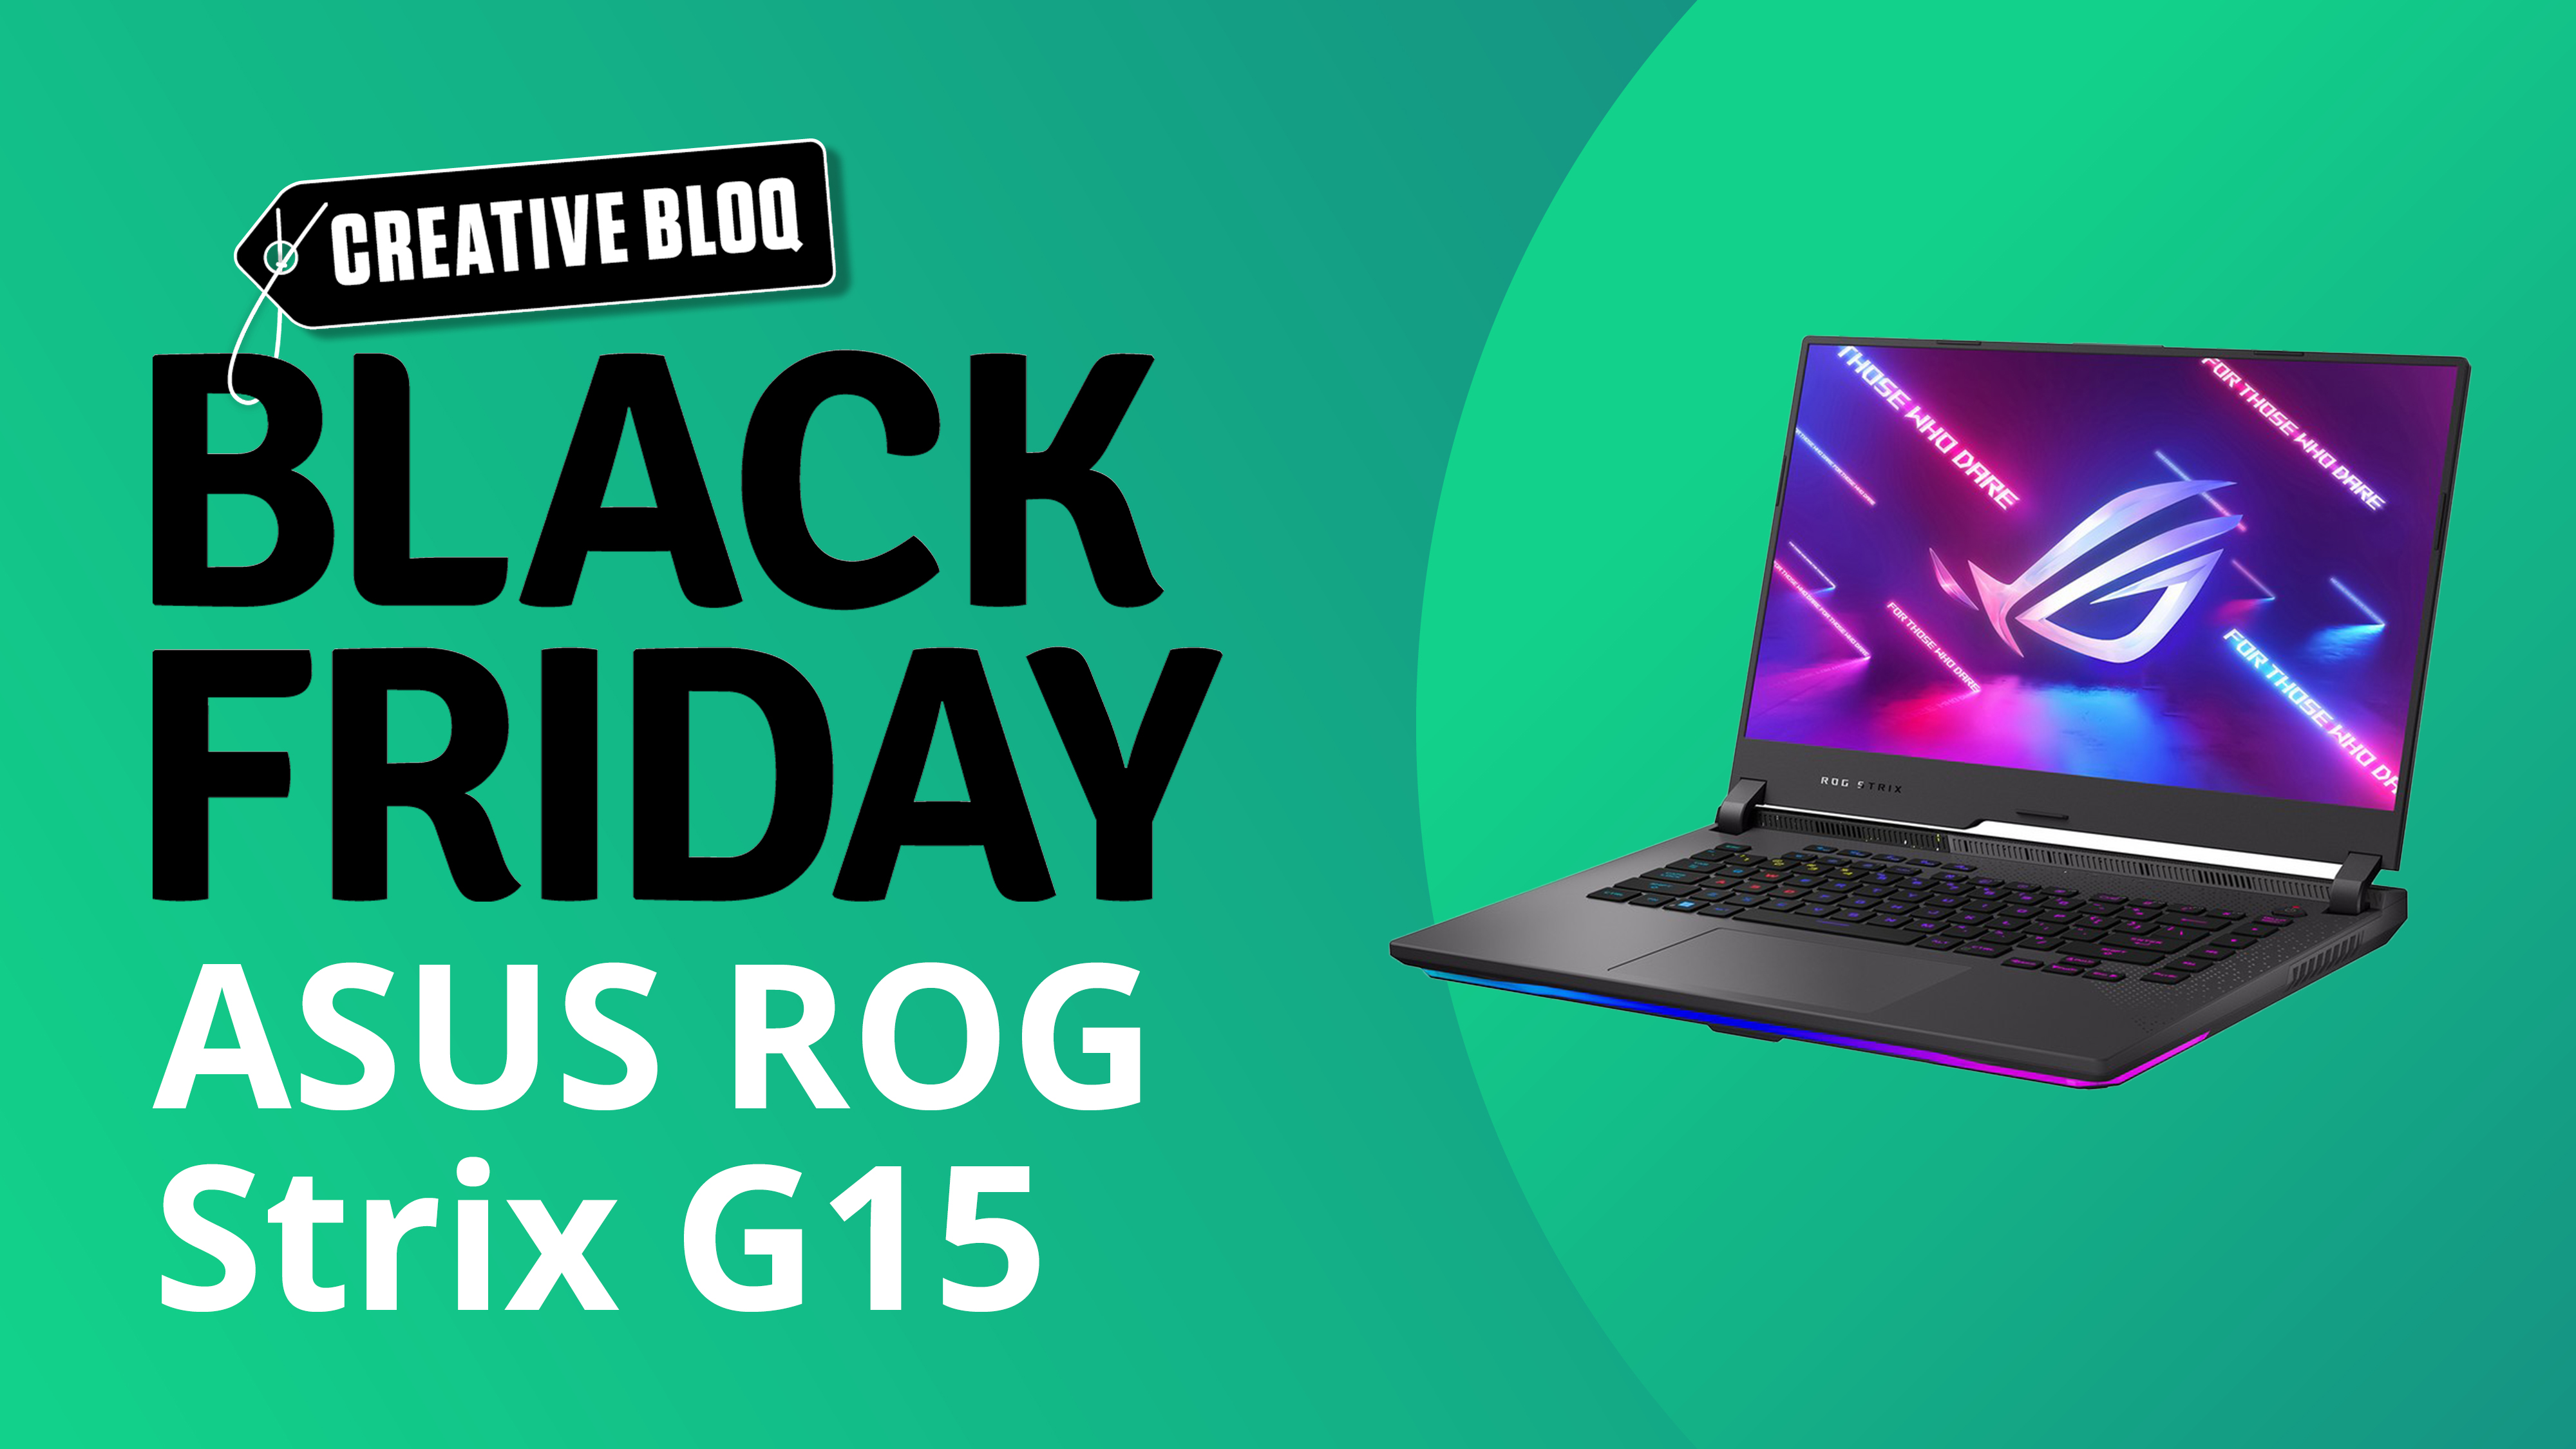 An image of ASUS ROG Strix G15 next to the text Creative Bloq Black Friday: ASUS ROG Strix G15 on a green background